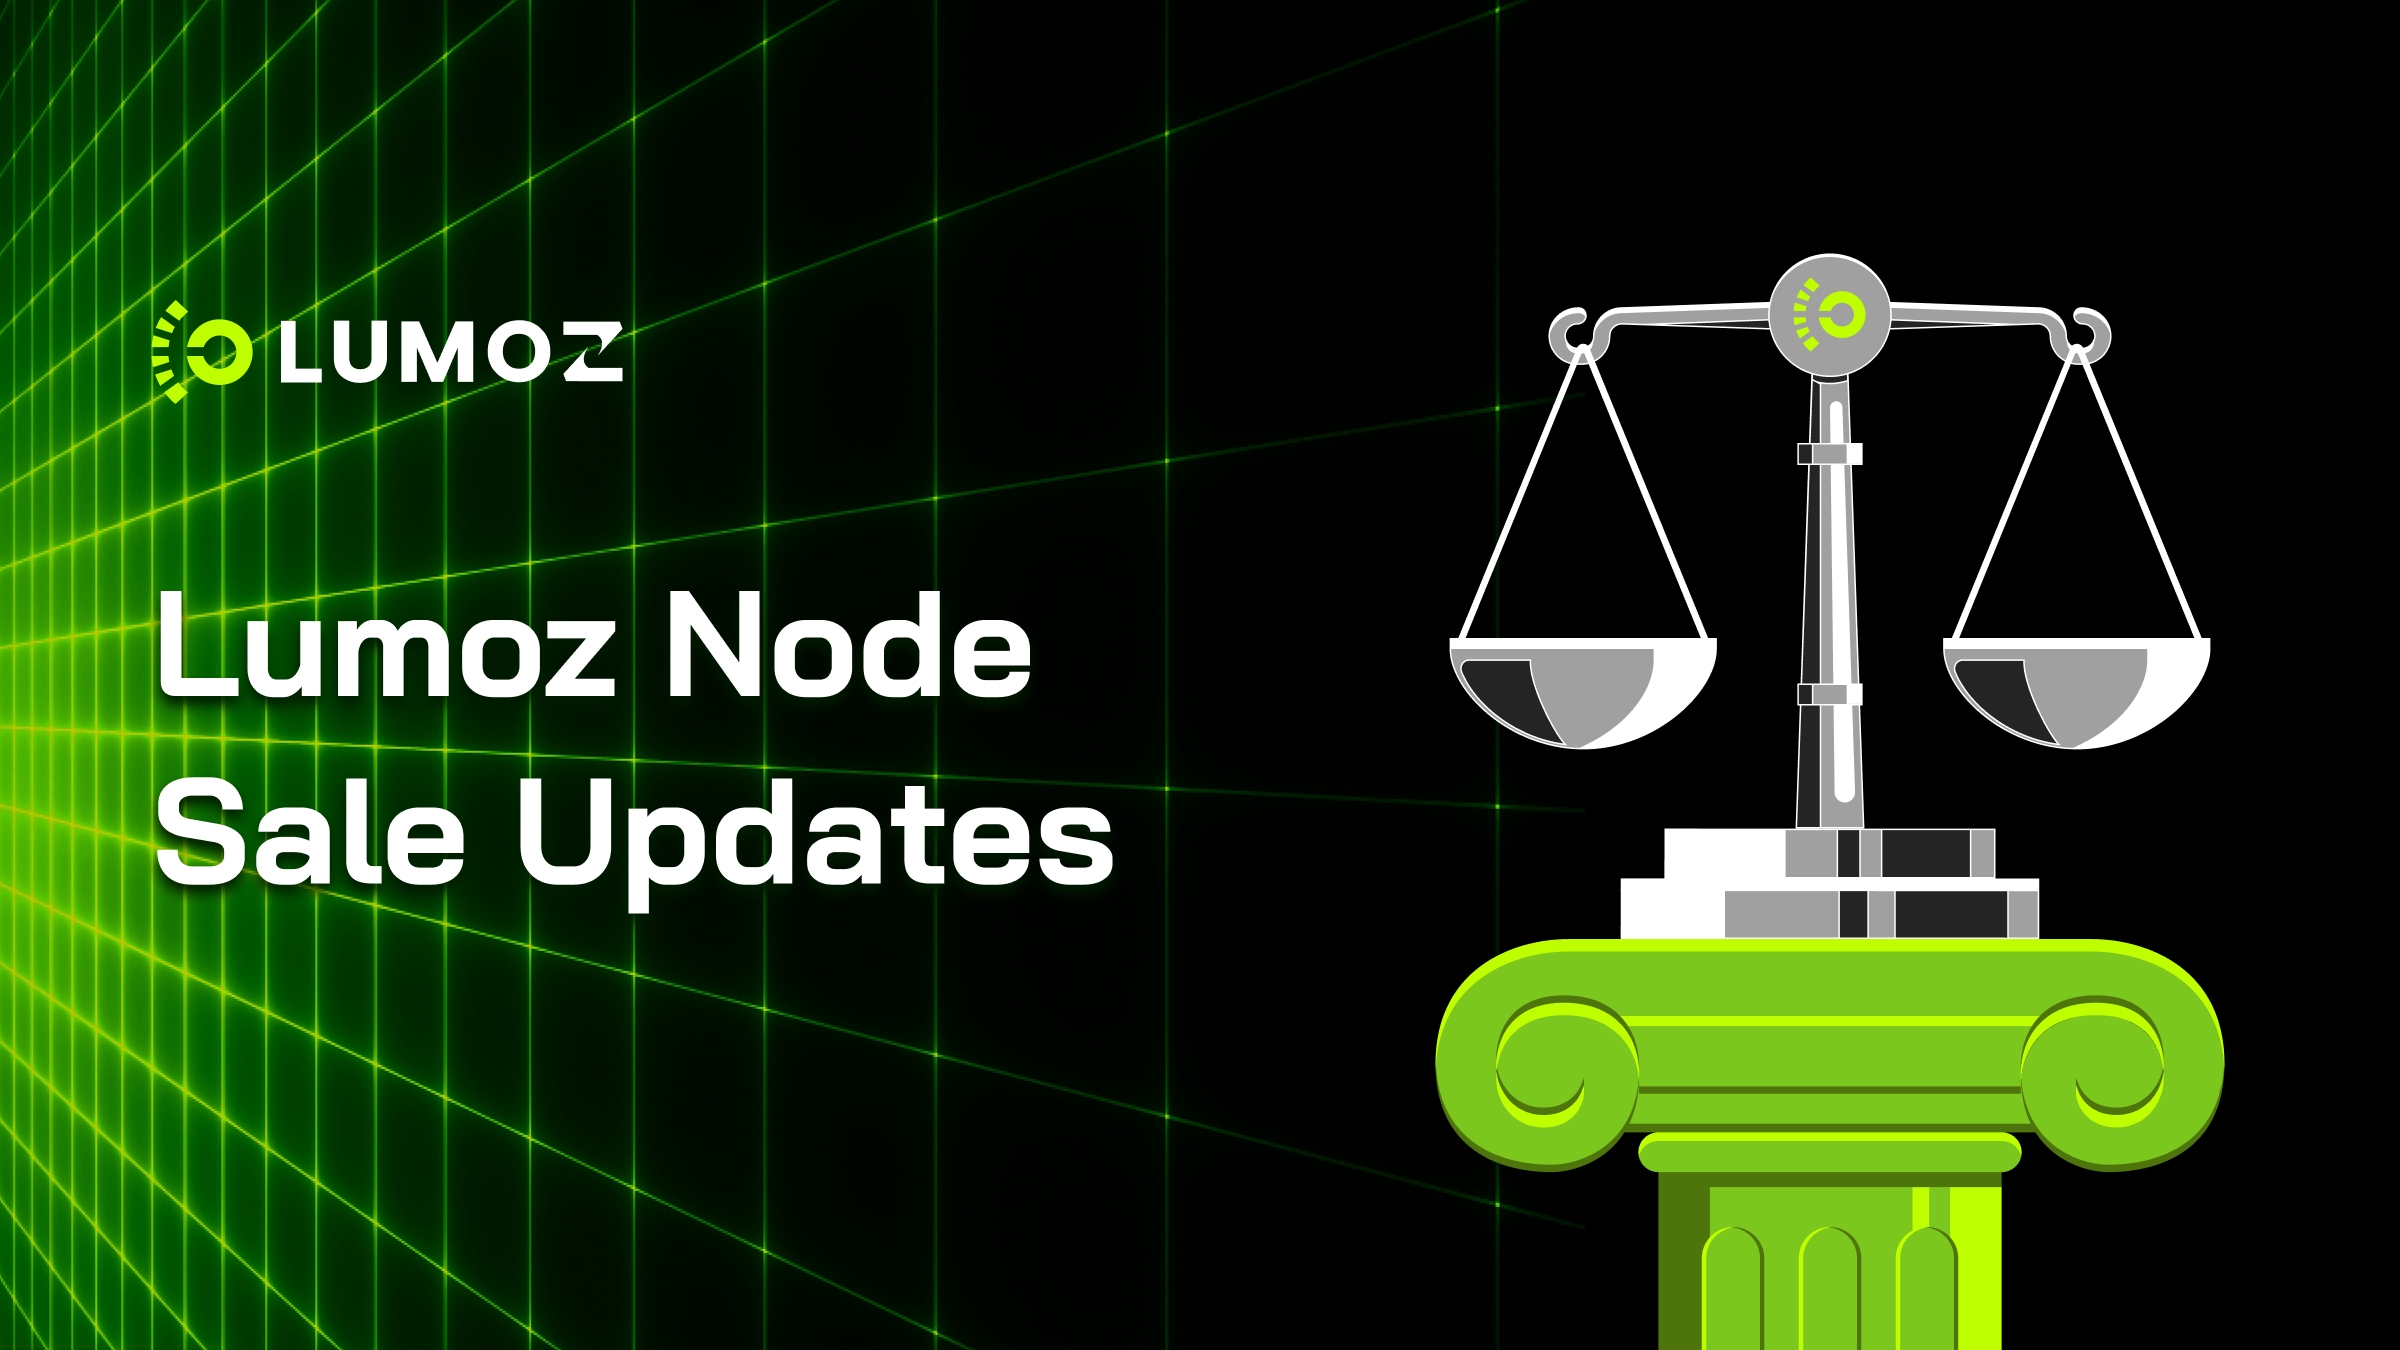 Lumoz Node Sale Updates: Ensuring Fair Valuation and Equal Opportunities